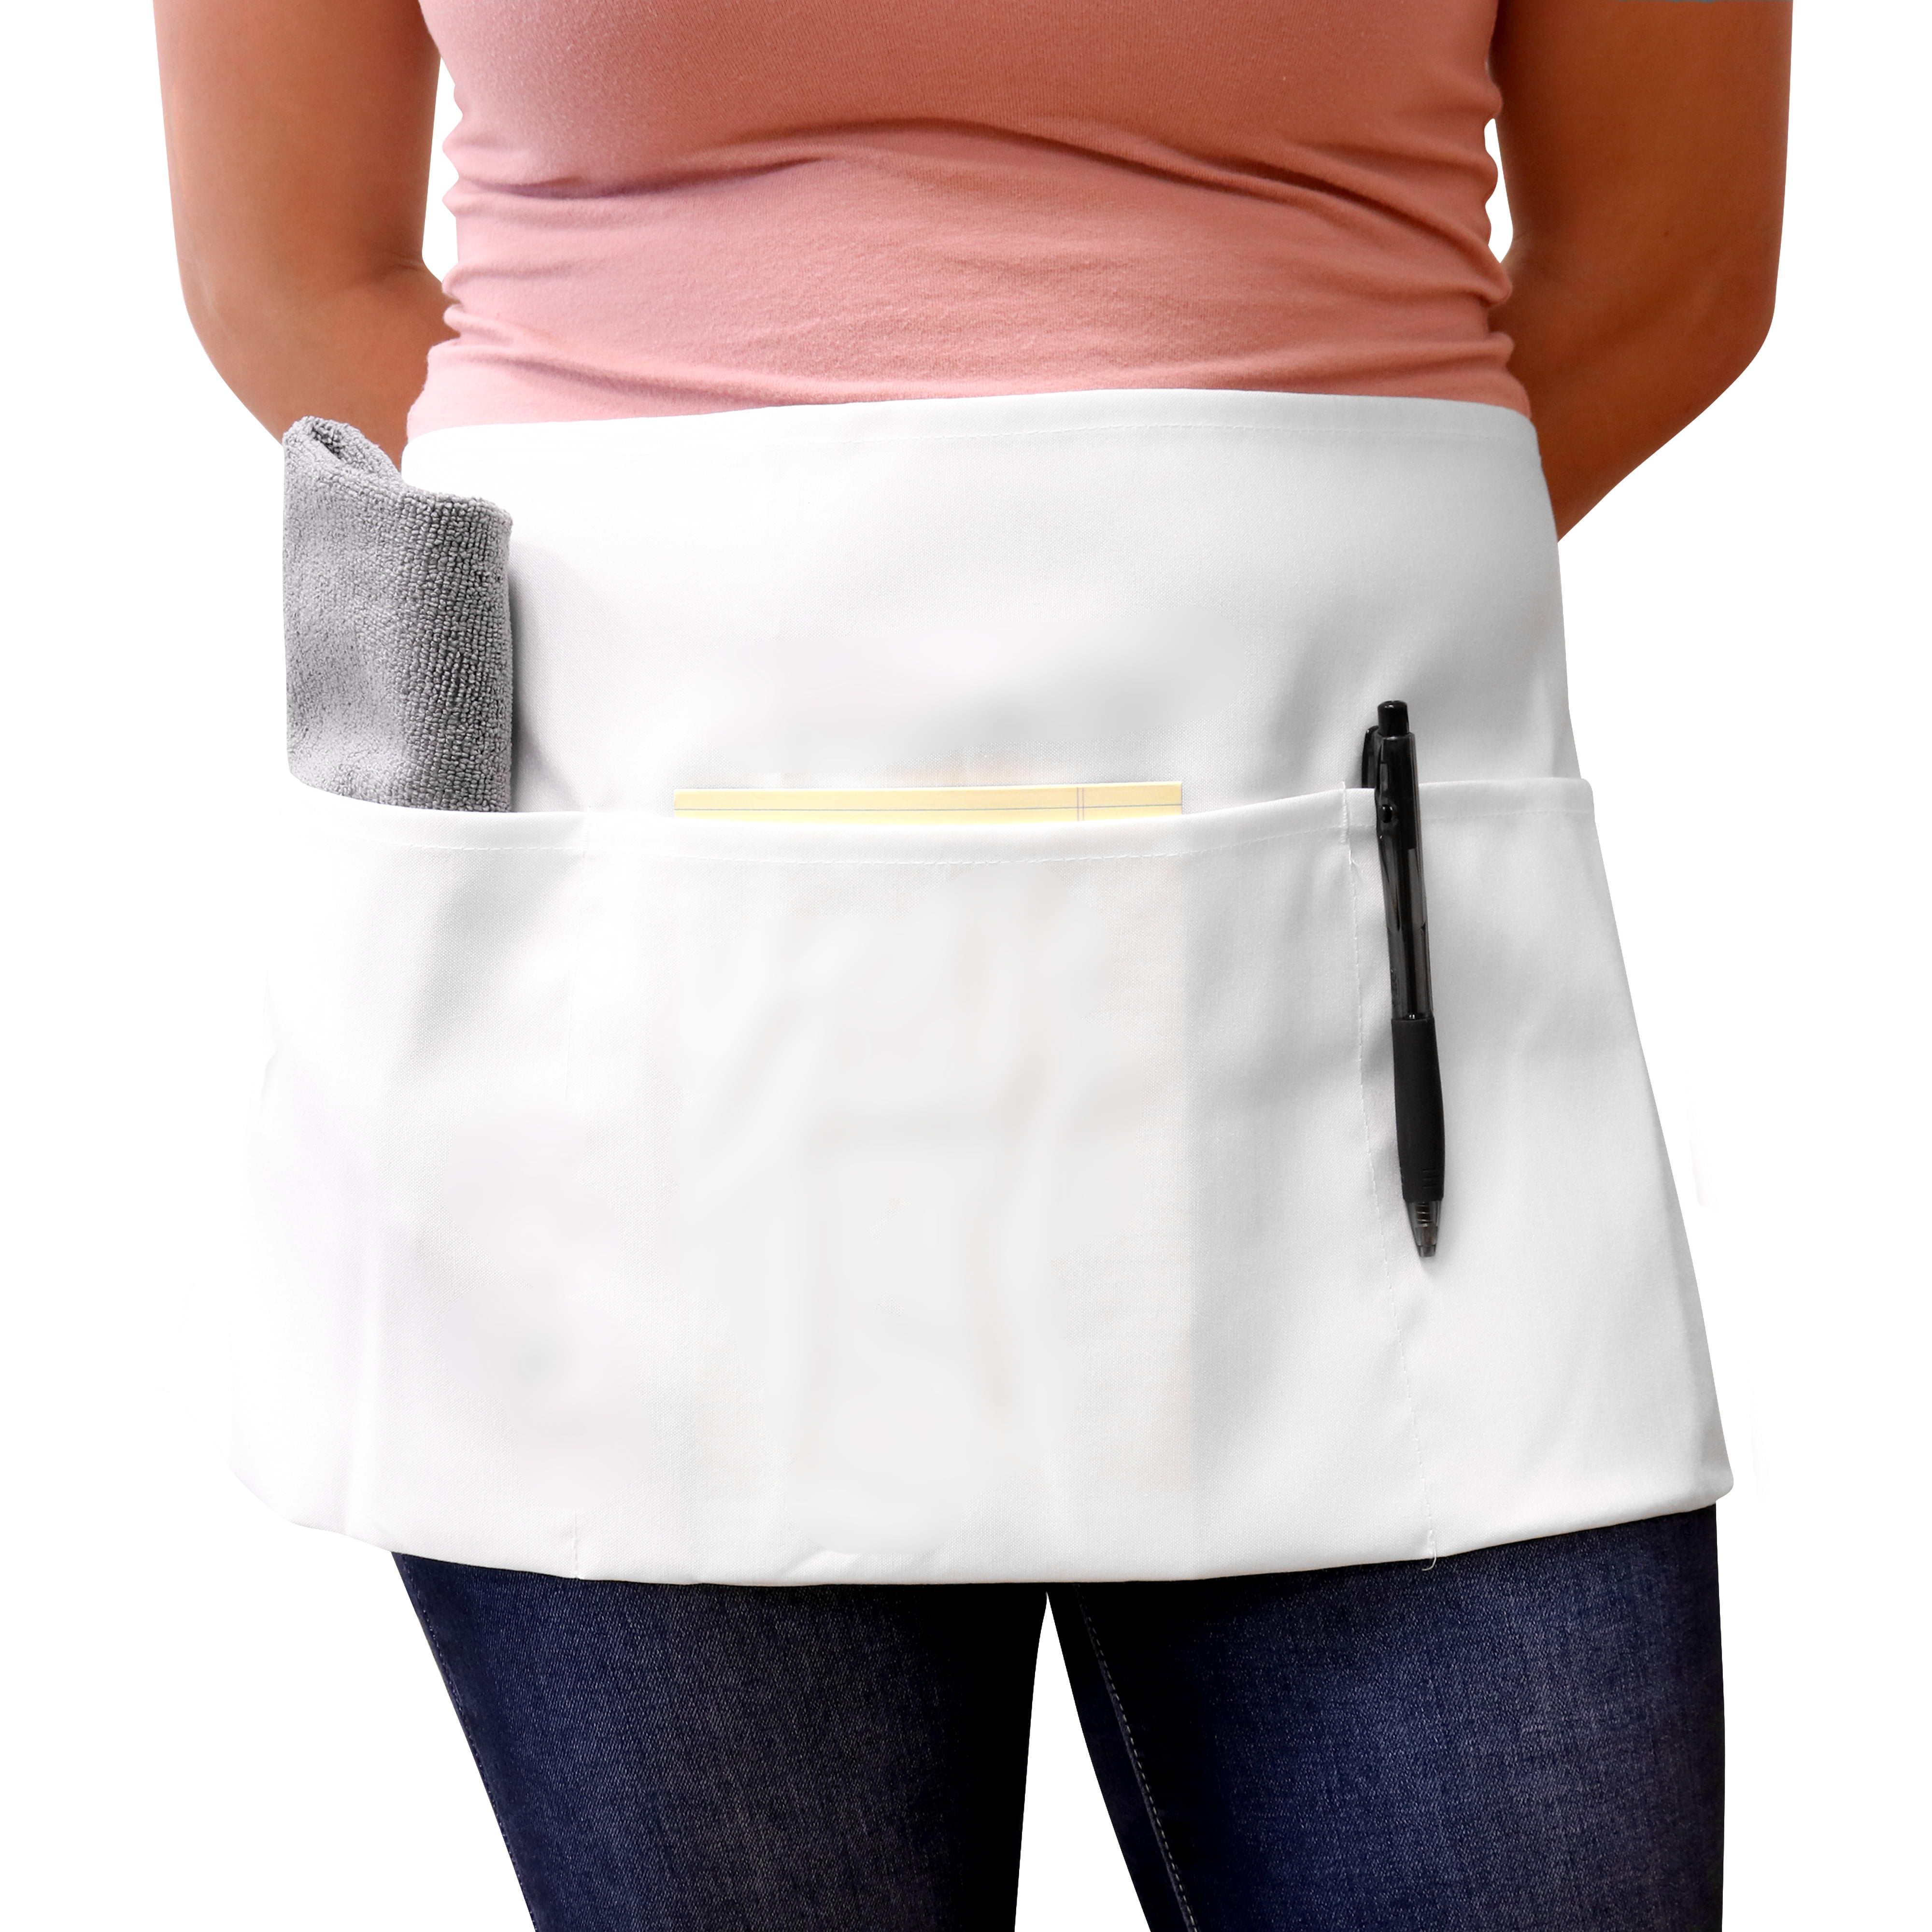 Waist Style with 3 Pockets Apron Cotton/Poly. Black 23" x 12" NEW 